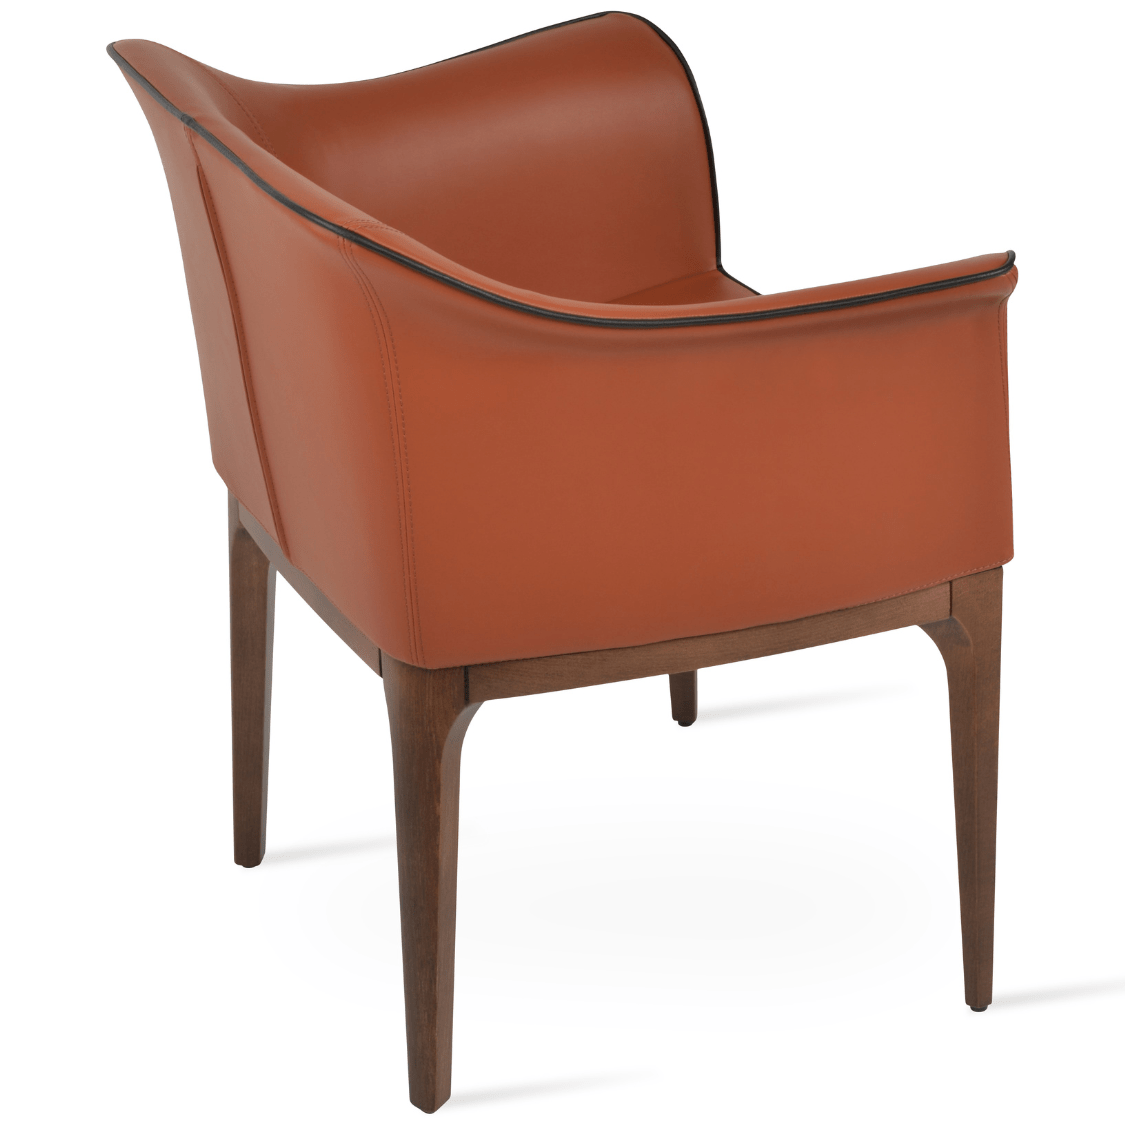 London Leather Dining Arm Chair - Your Bar Stools Canada